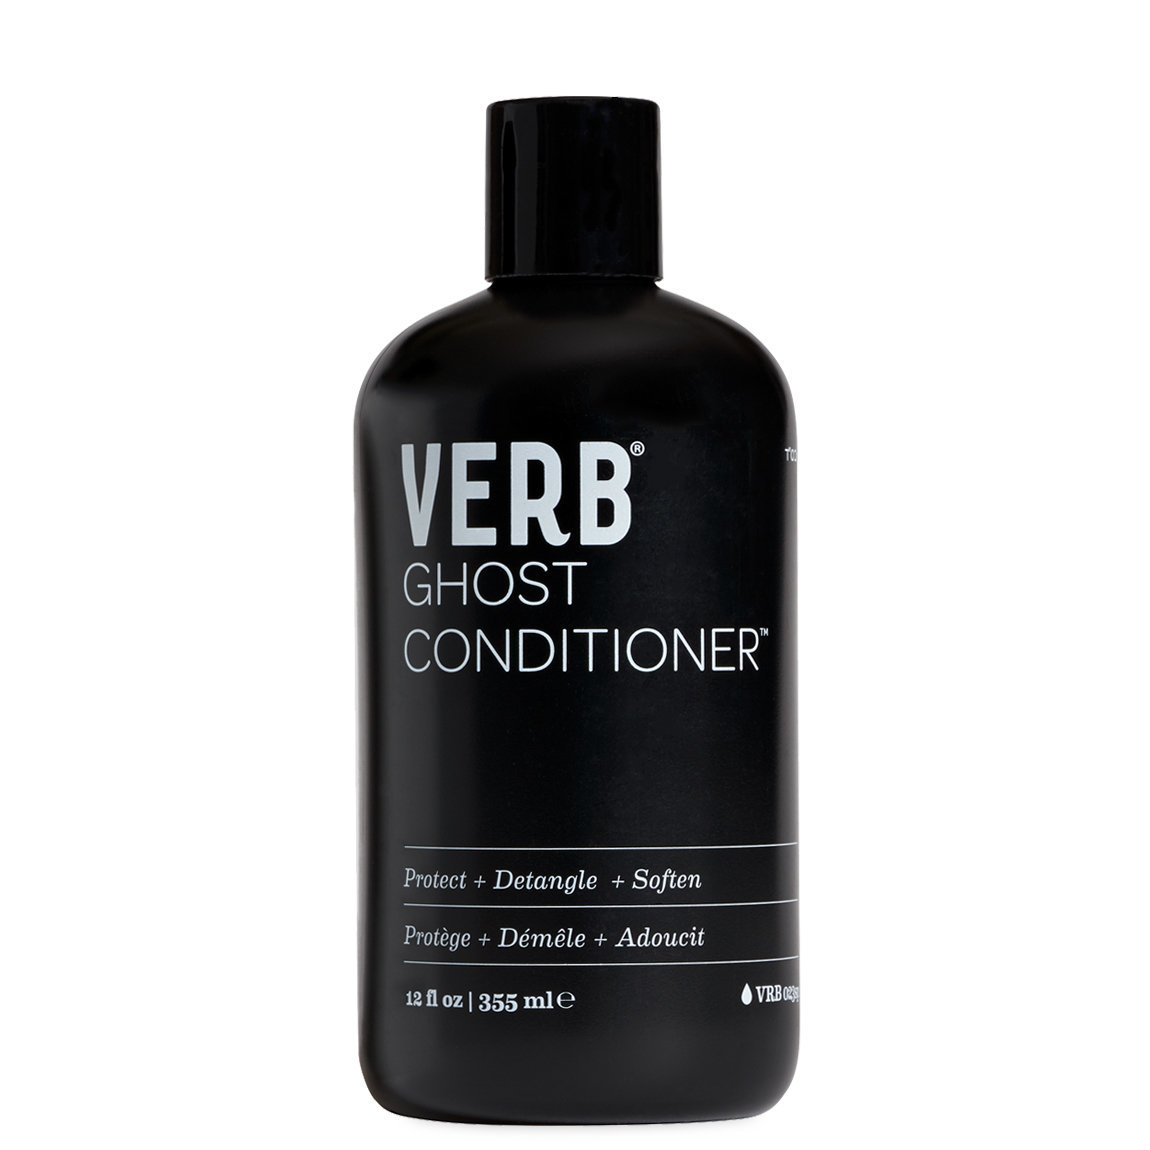 Verb Ghost Conditioner 12 fl oz  alternative view 1 - product swatch.